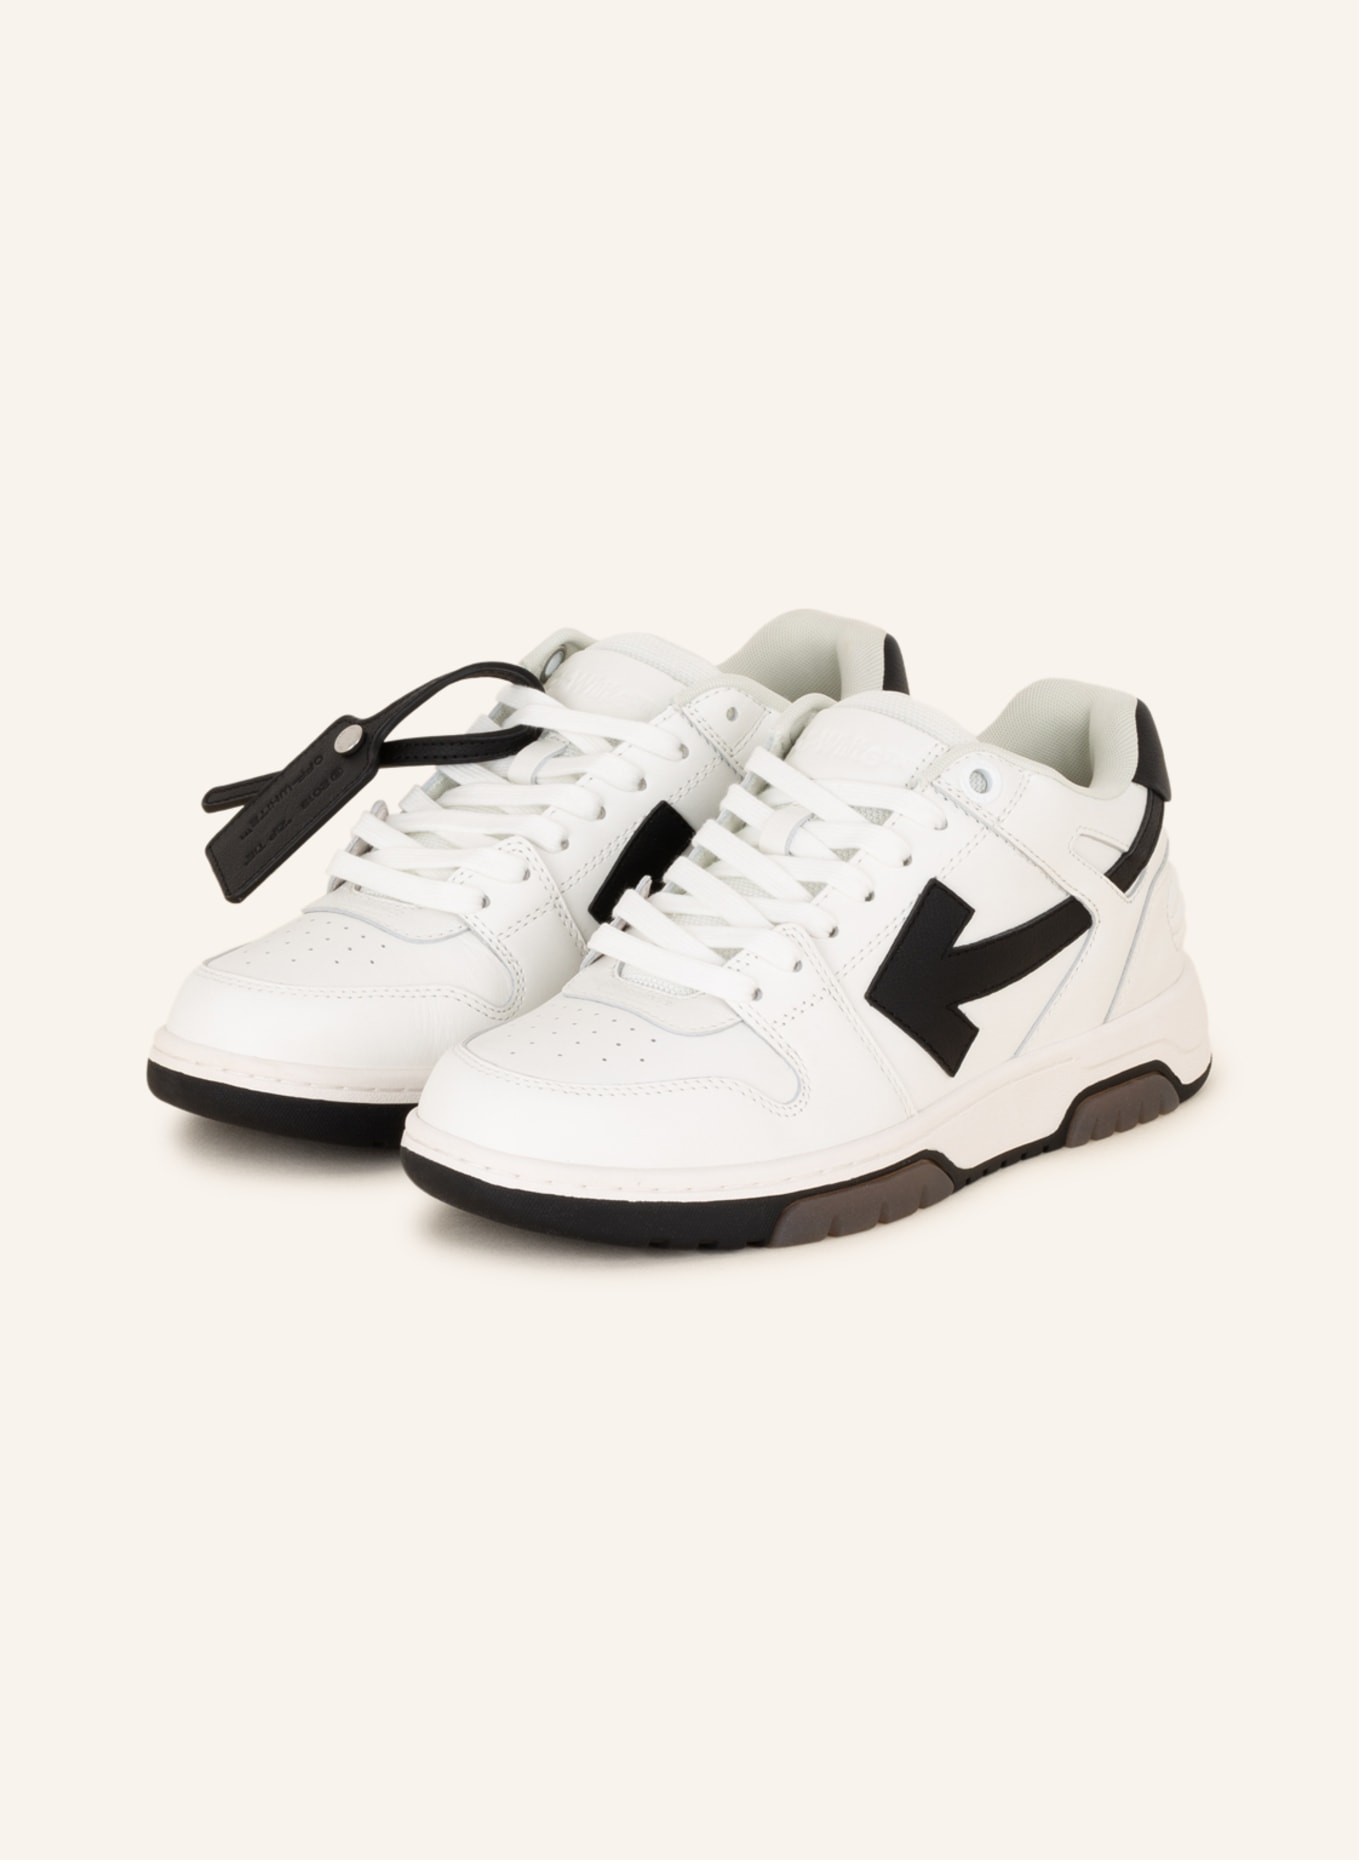 OFF-WHITE™ KIDS Sneakers Girl 9-16 years online on YOOX United States